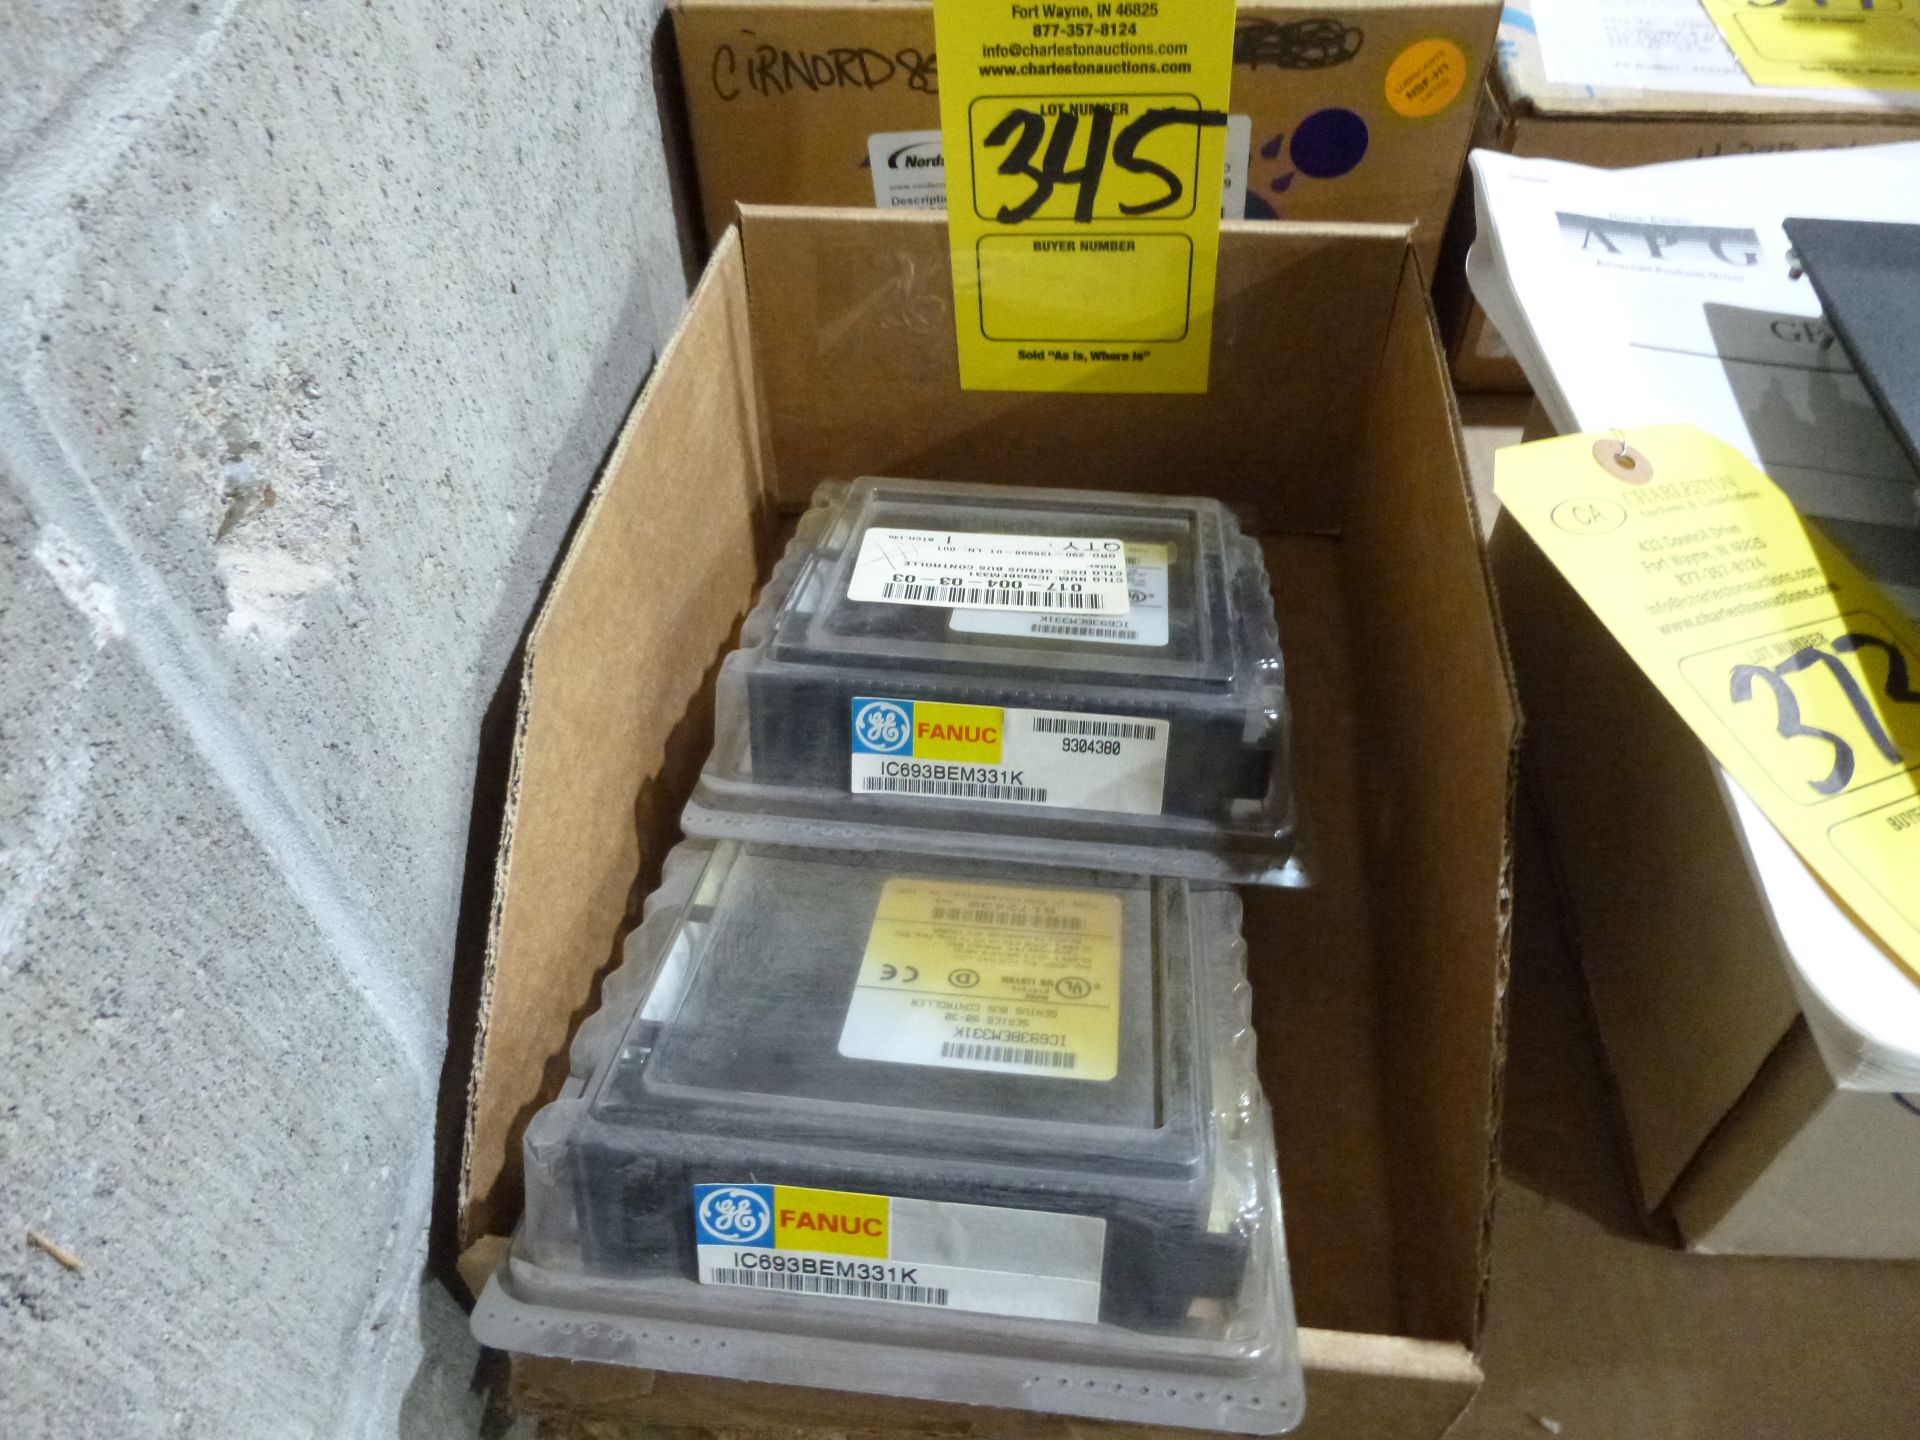 Qty 2 GE Fanuc IC693BEM331K, new in packages, packages show wear, as always with Brolyn LLC